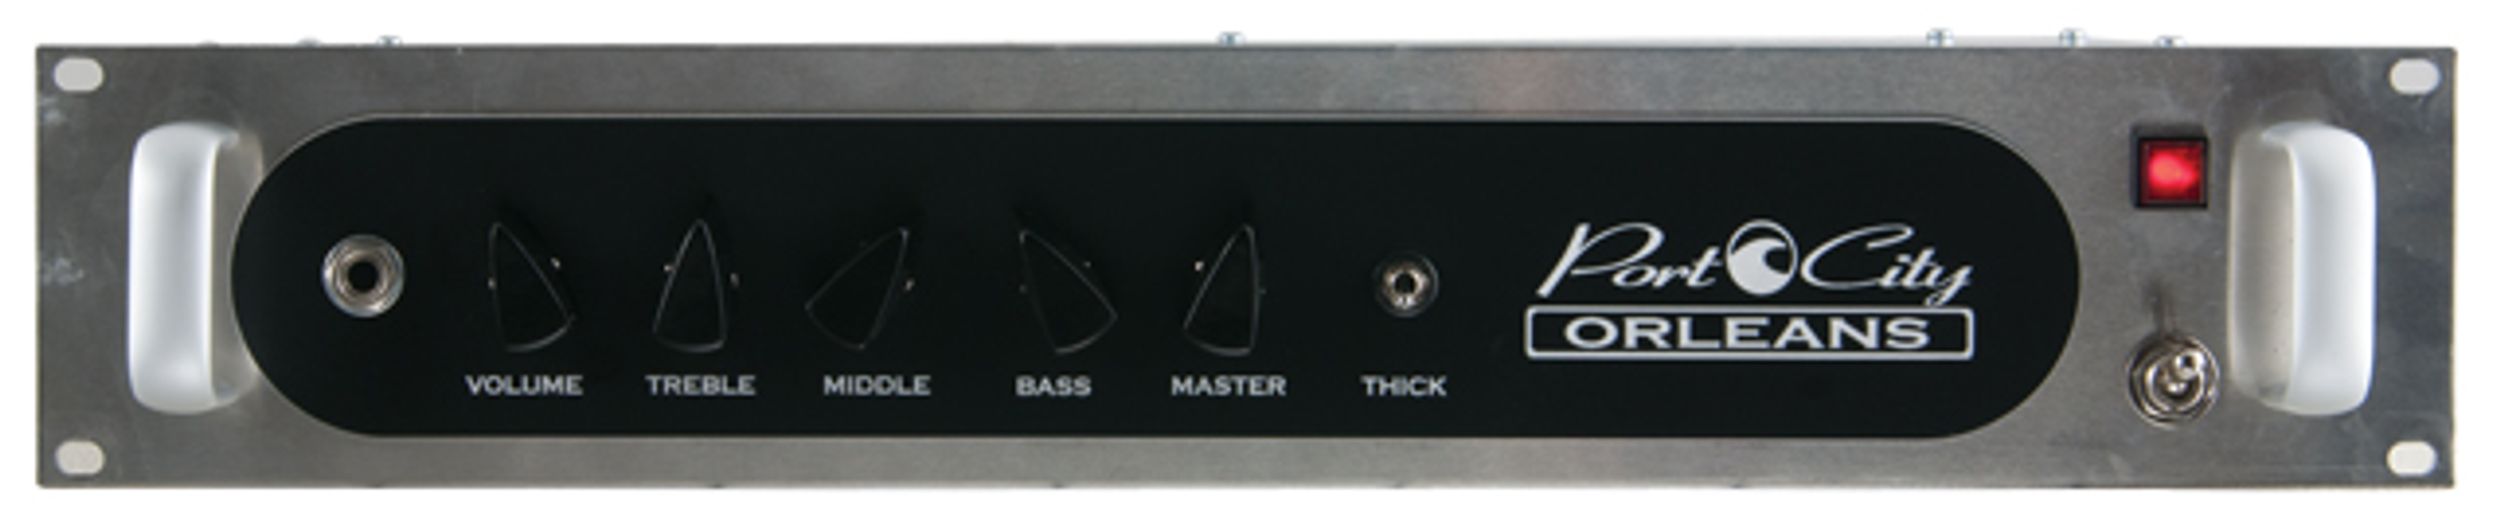 Port City Orleans Bass Preamp Review